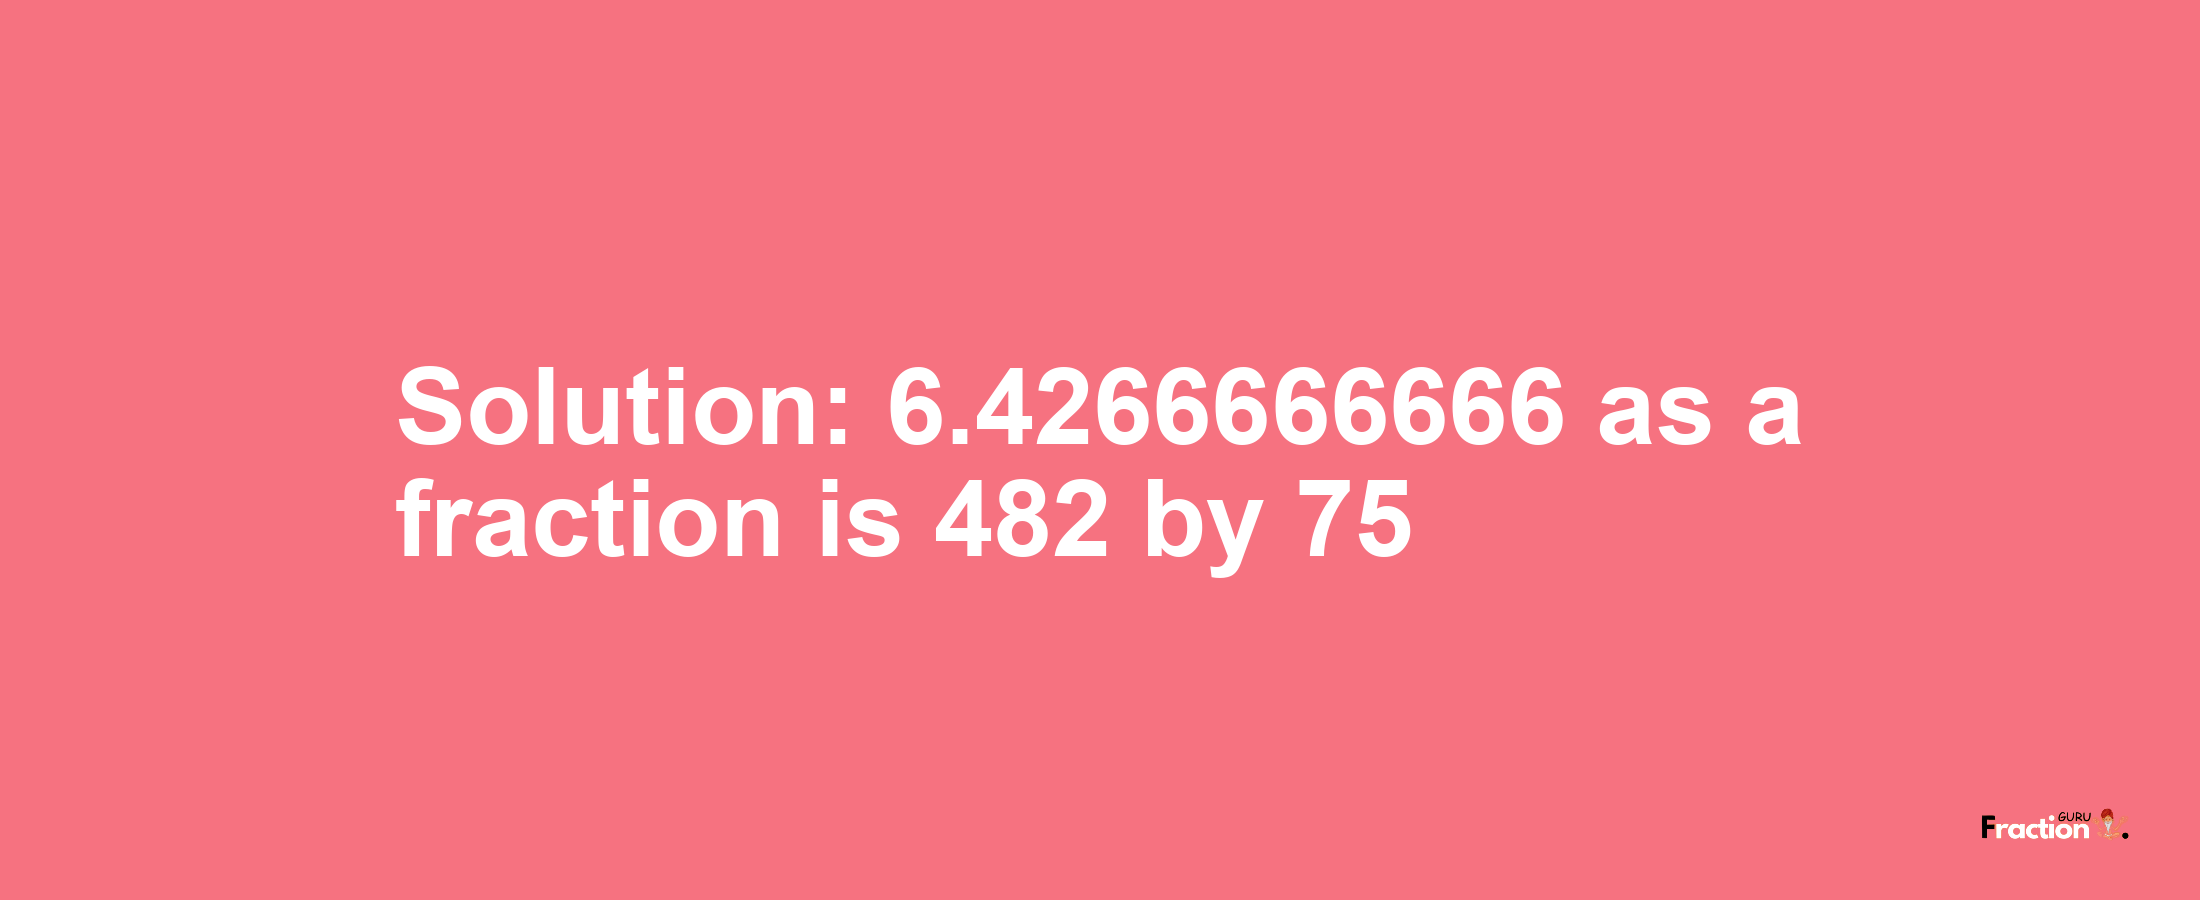 Solution:6.4266666666 as a fraction is 482/75